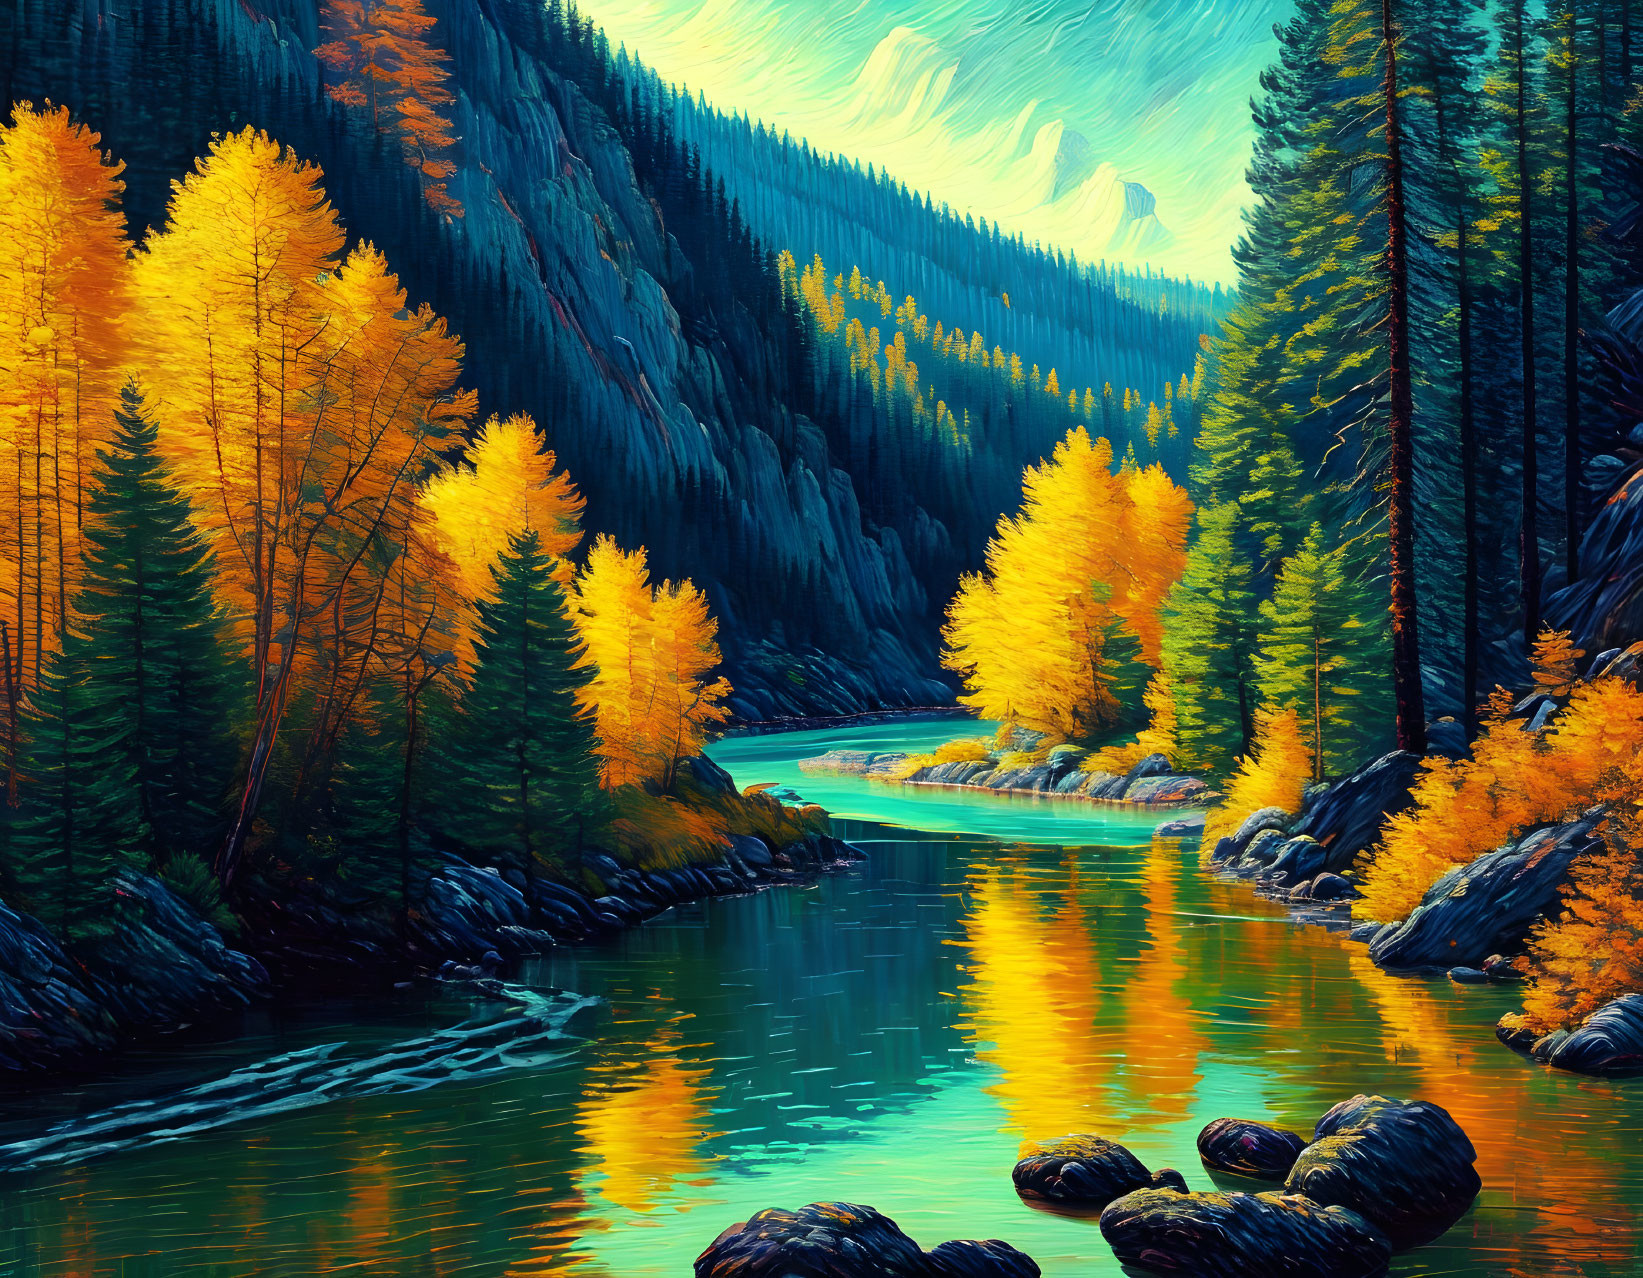 Scenic river winding through forest with golden pine trees